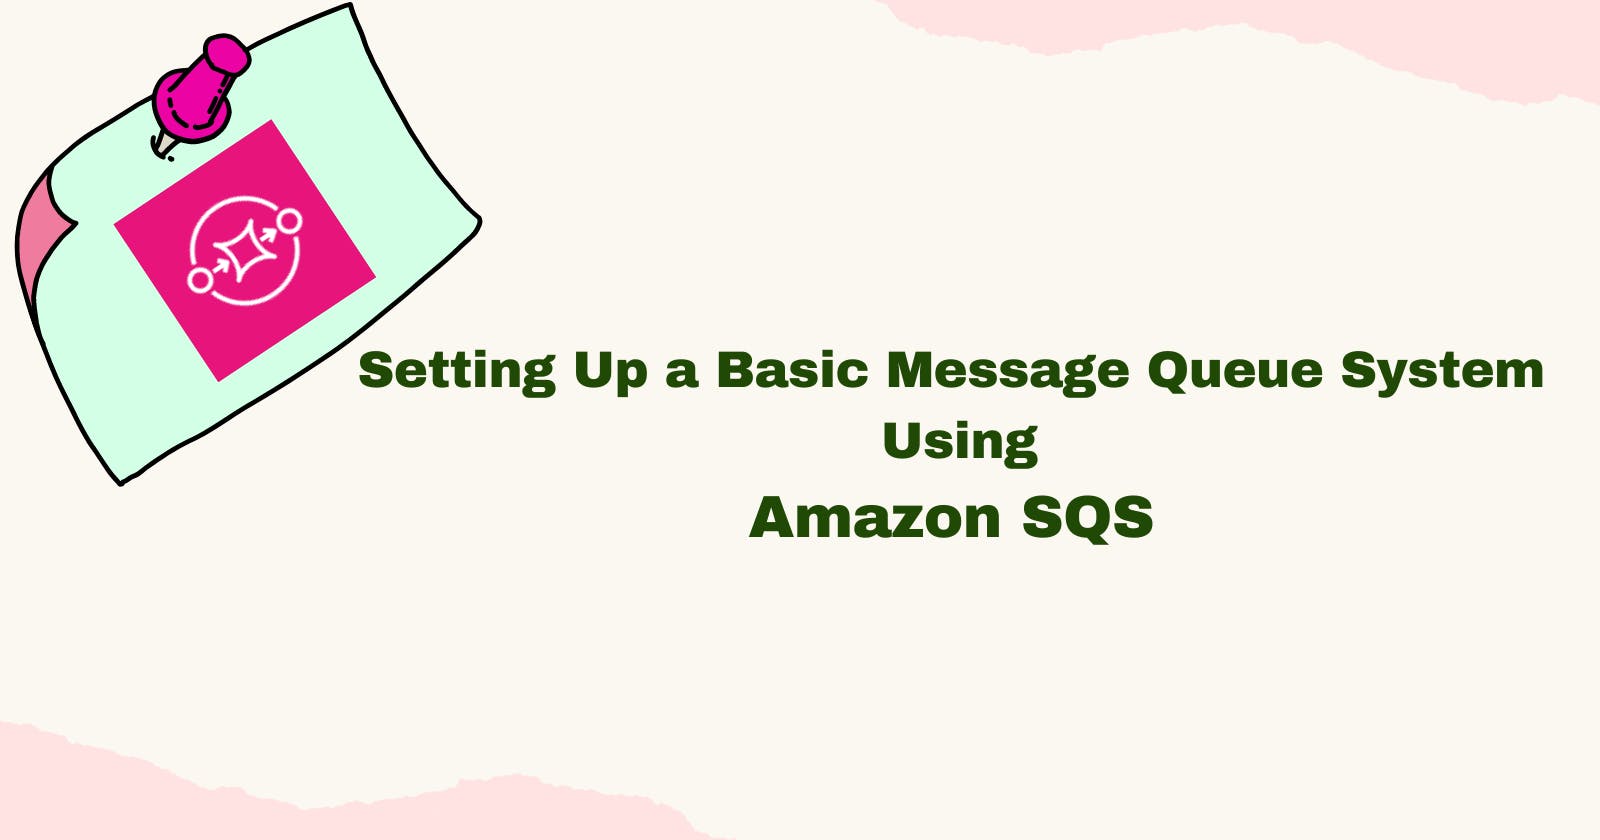 Setting Up a Basic Message Queue System Using Amazon SQS